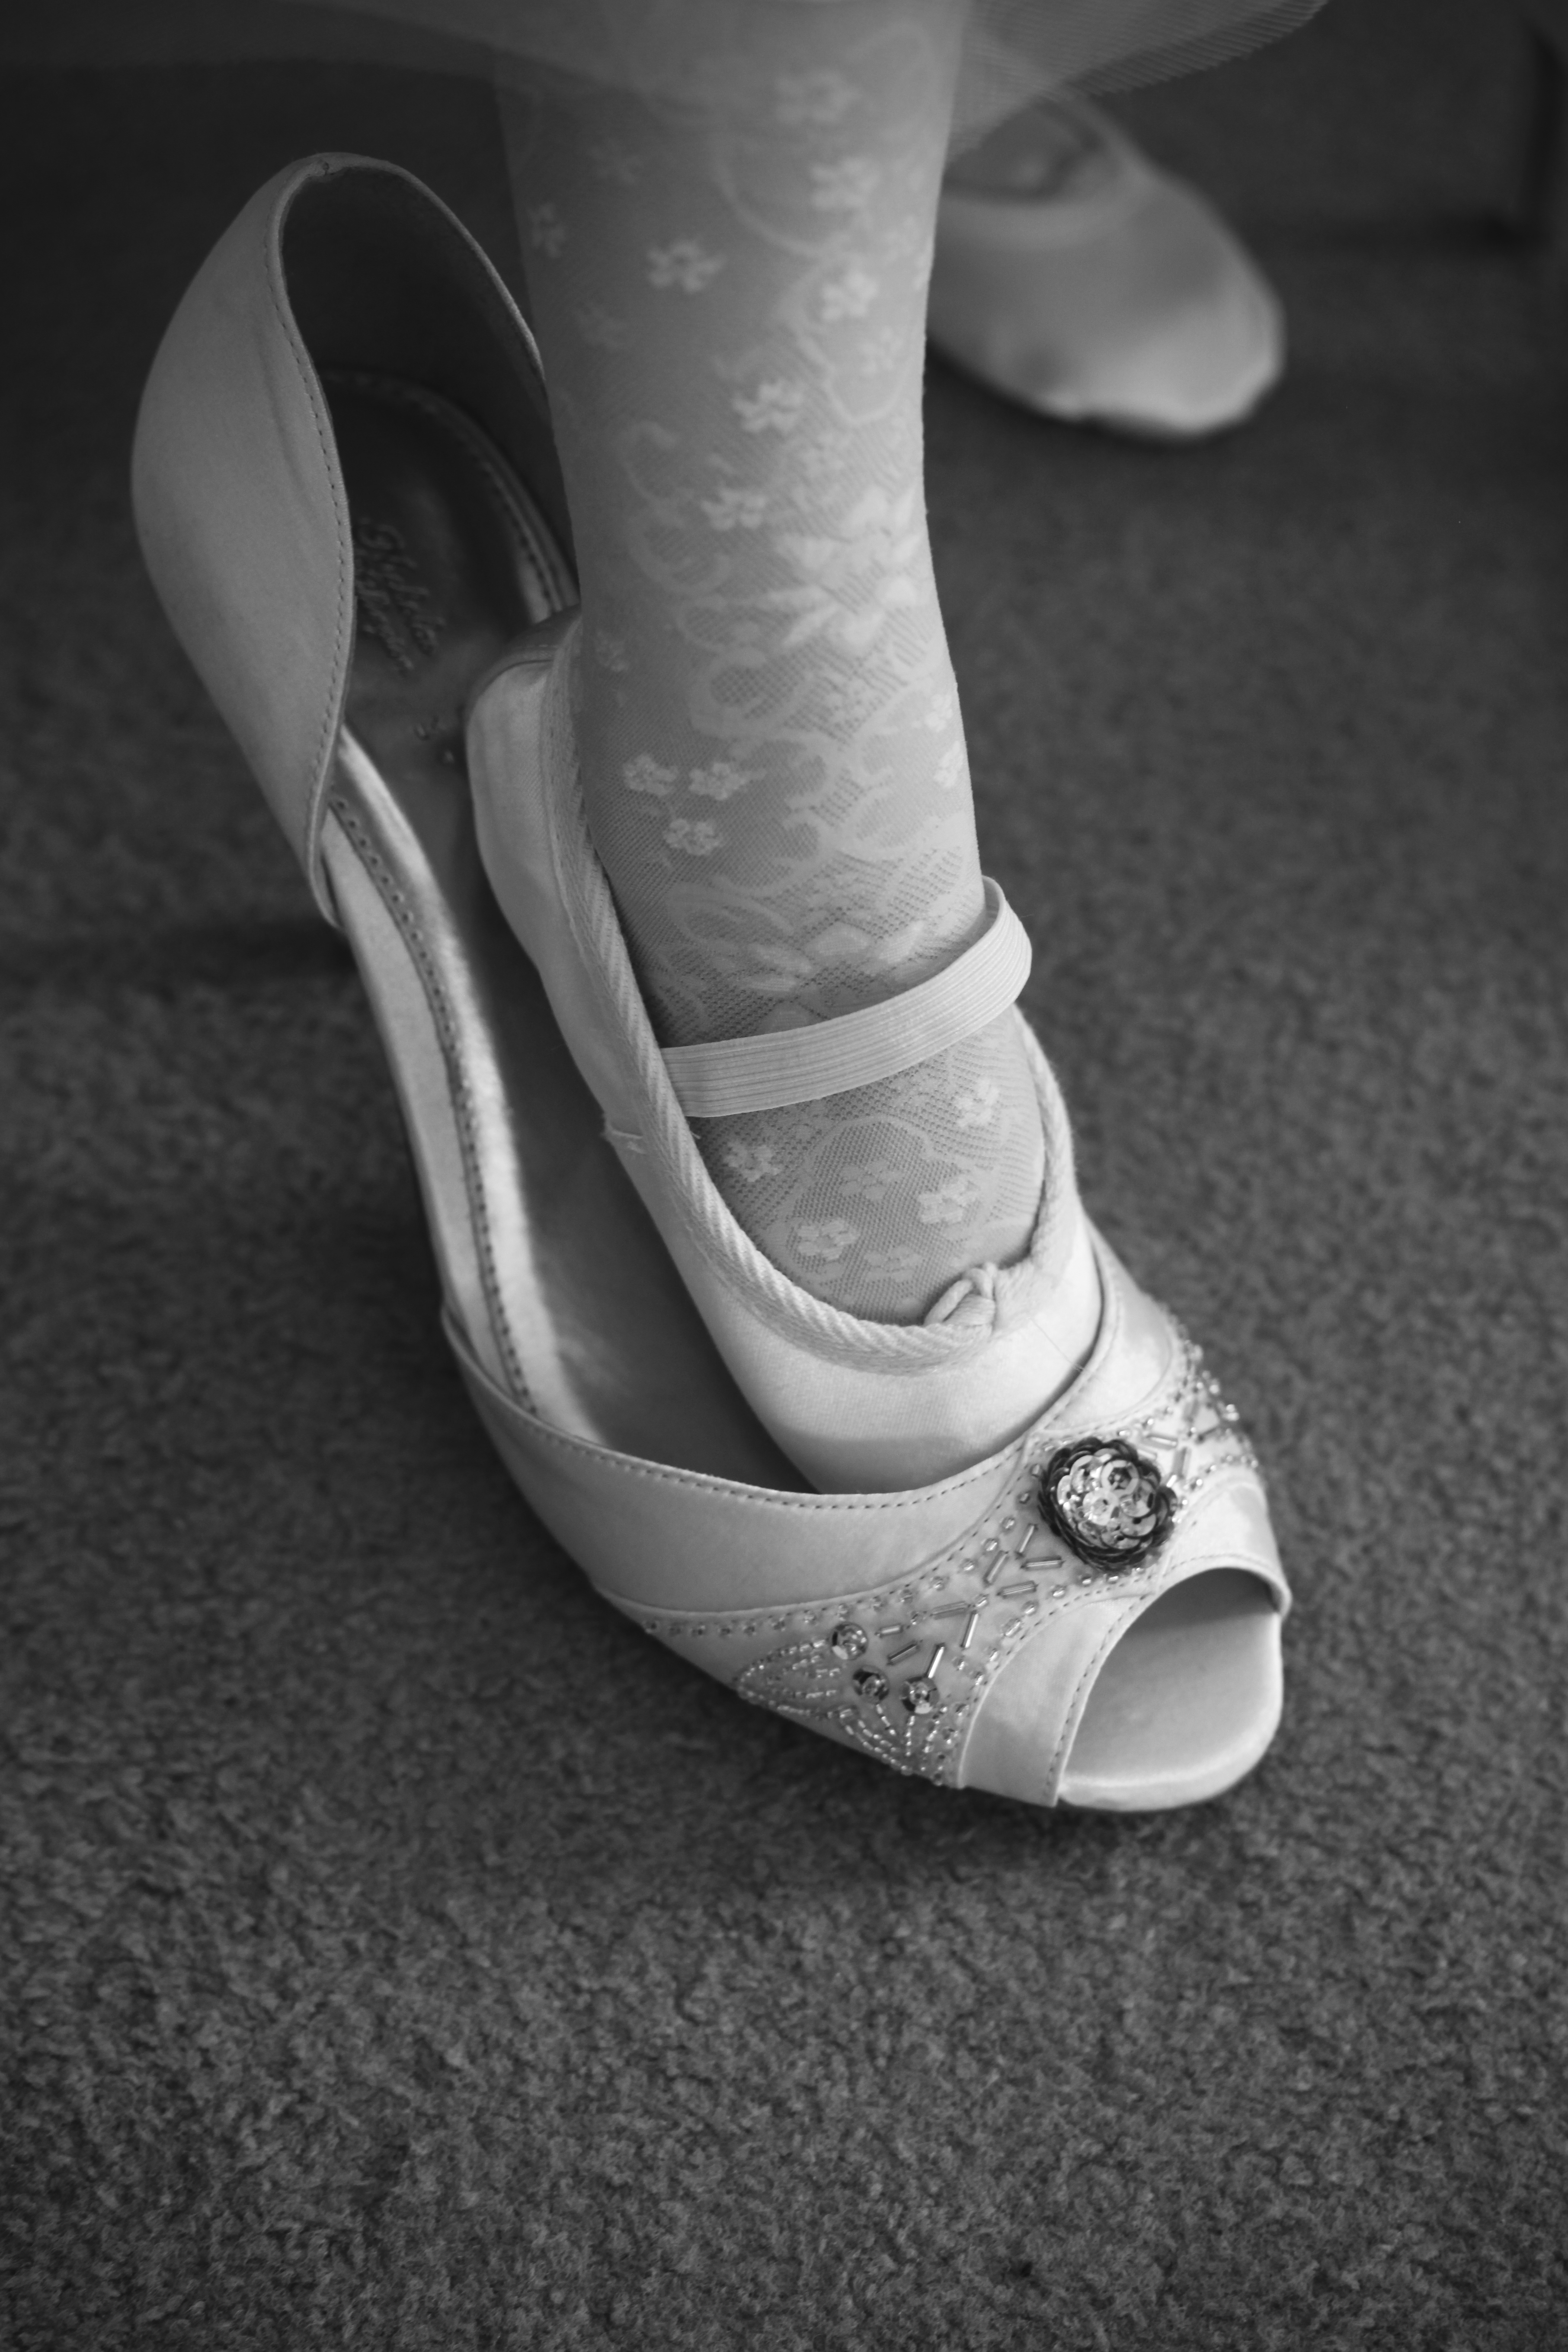 Flower Girl with Bride's shoe